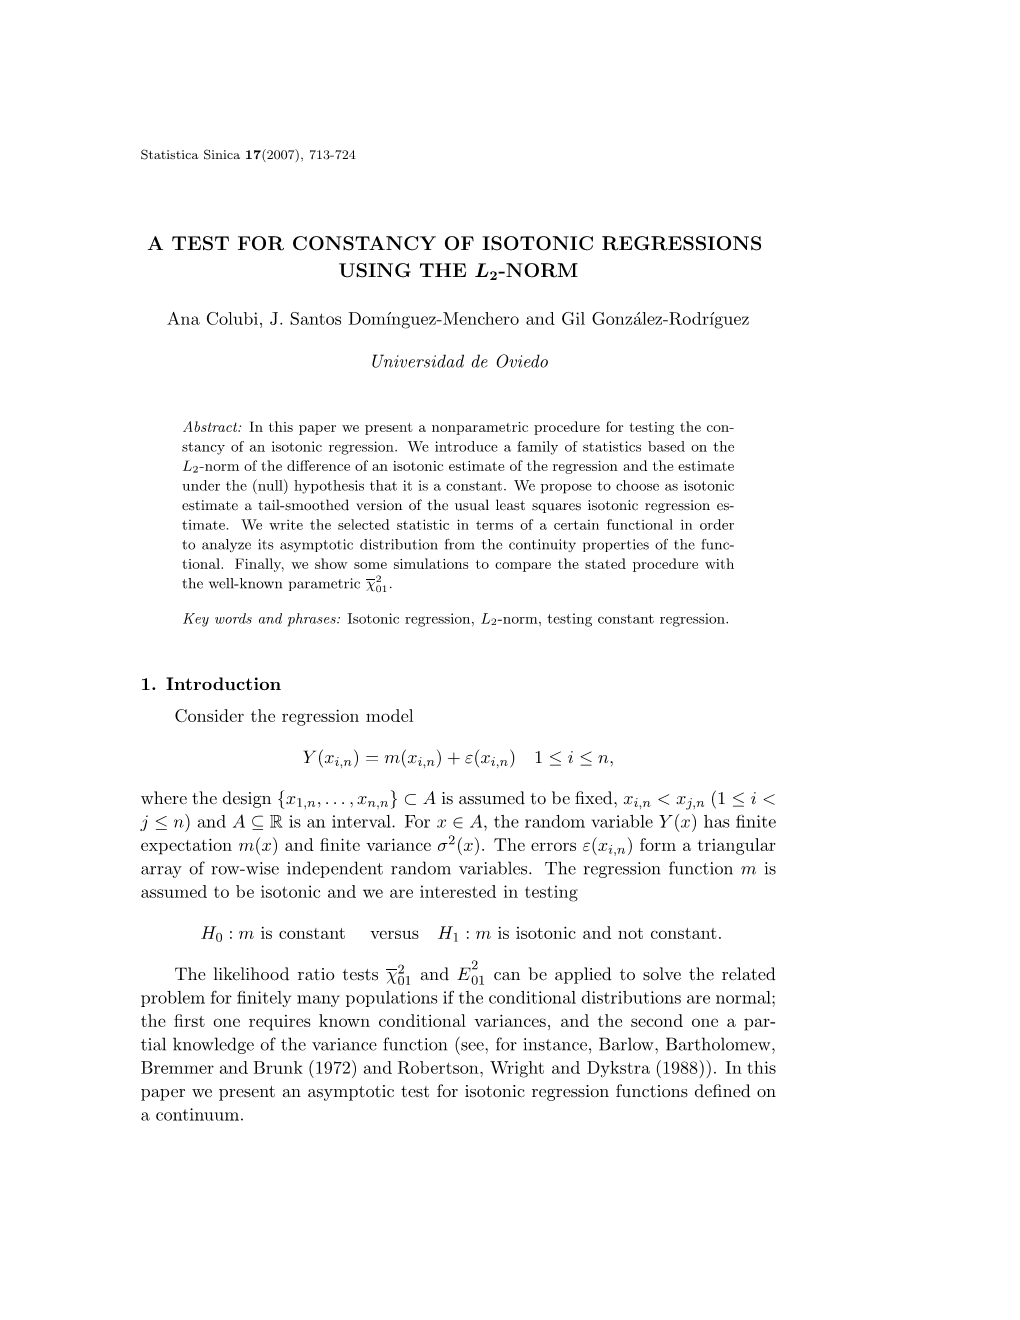 A Test for Constancy of Isotonic Regressions Using